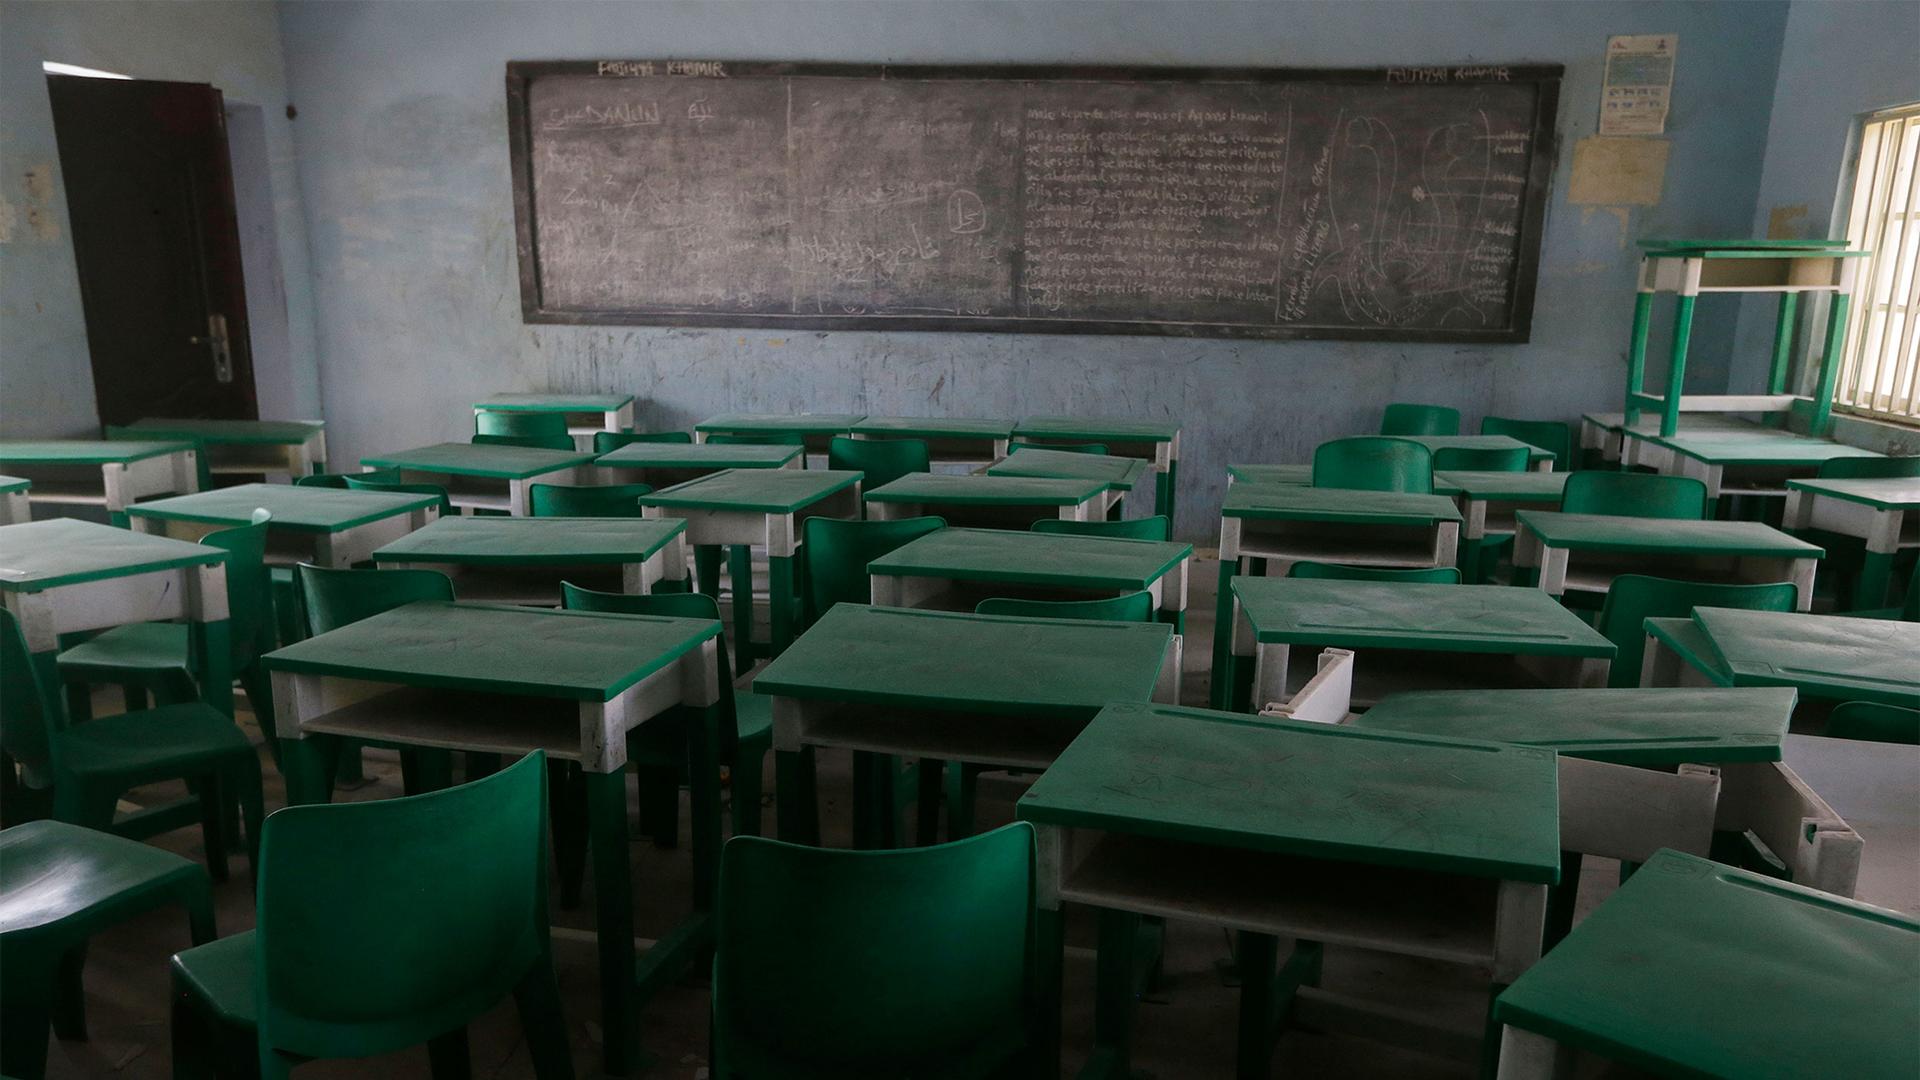 Empty green desks and chairs in a classroom with a chalkboard at the front